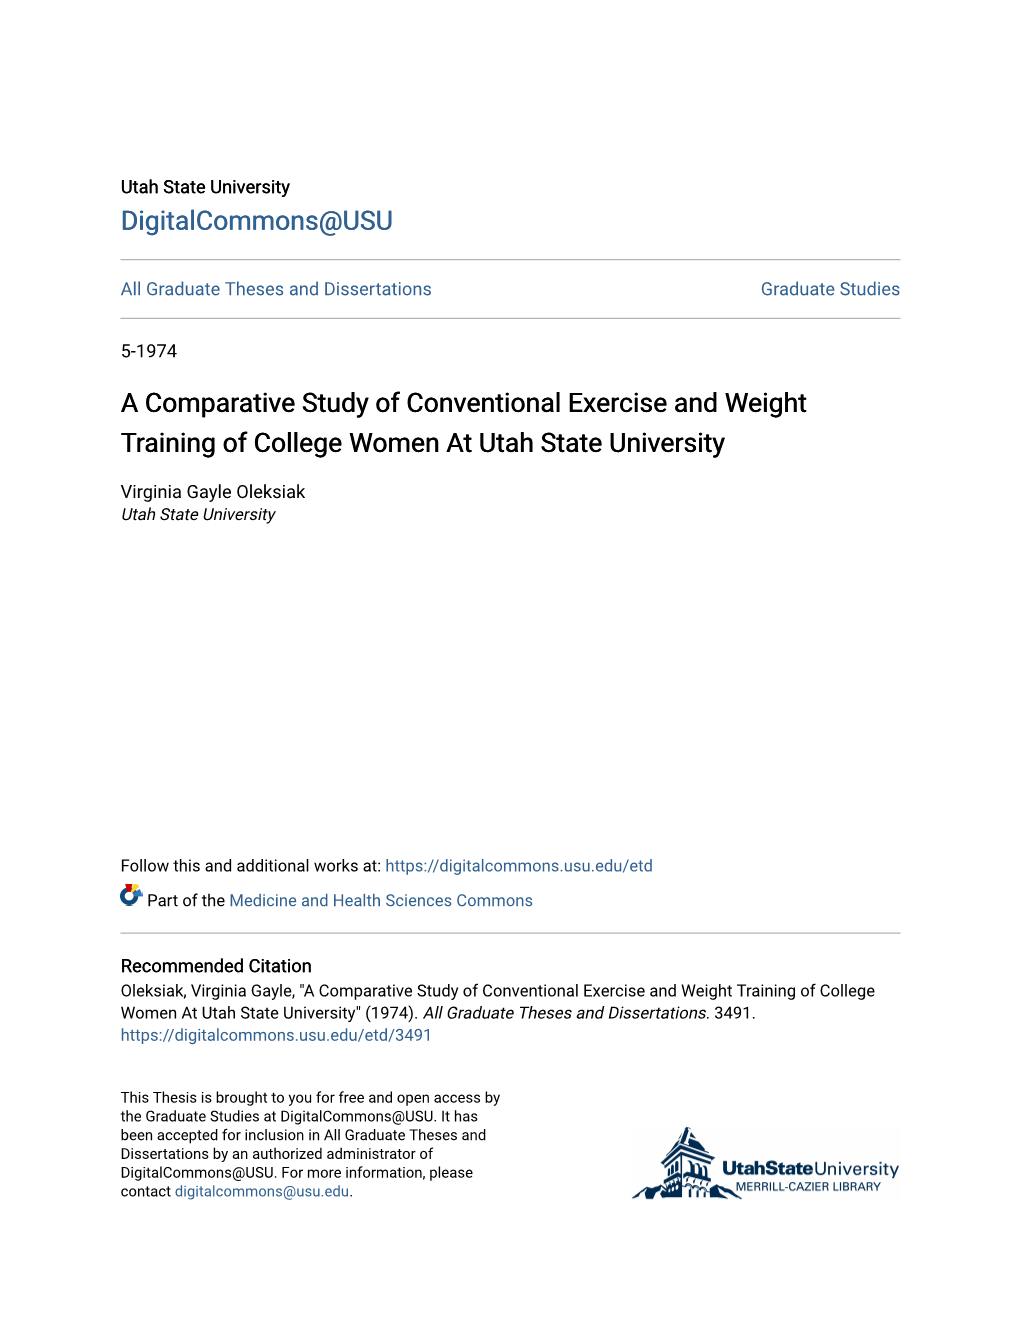 A Comparative Study of Conventional Exercise and Weight Training of College Women at Utah State University